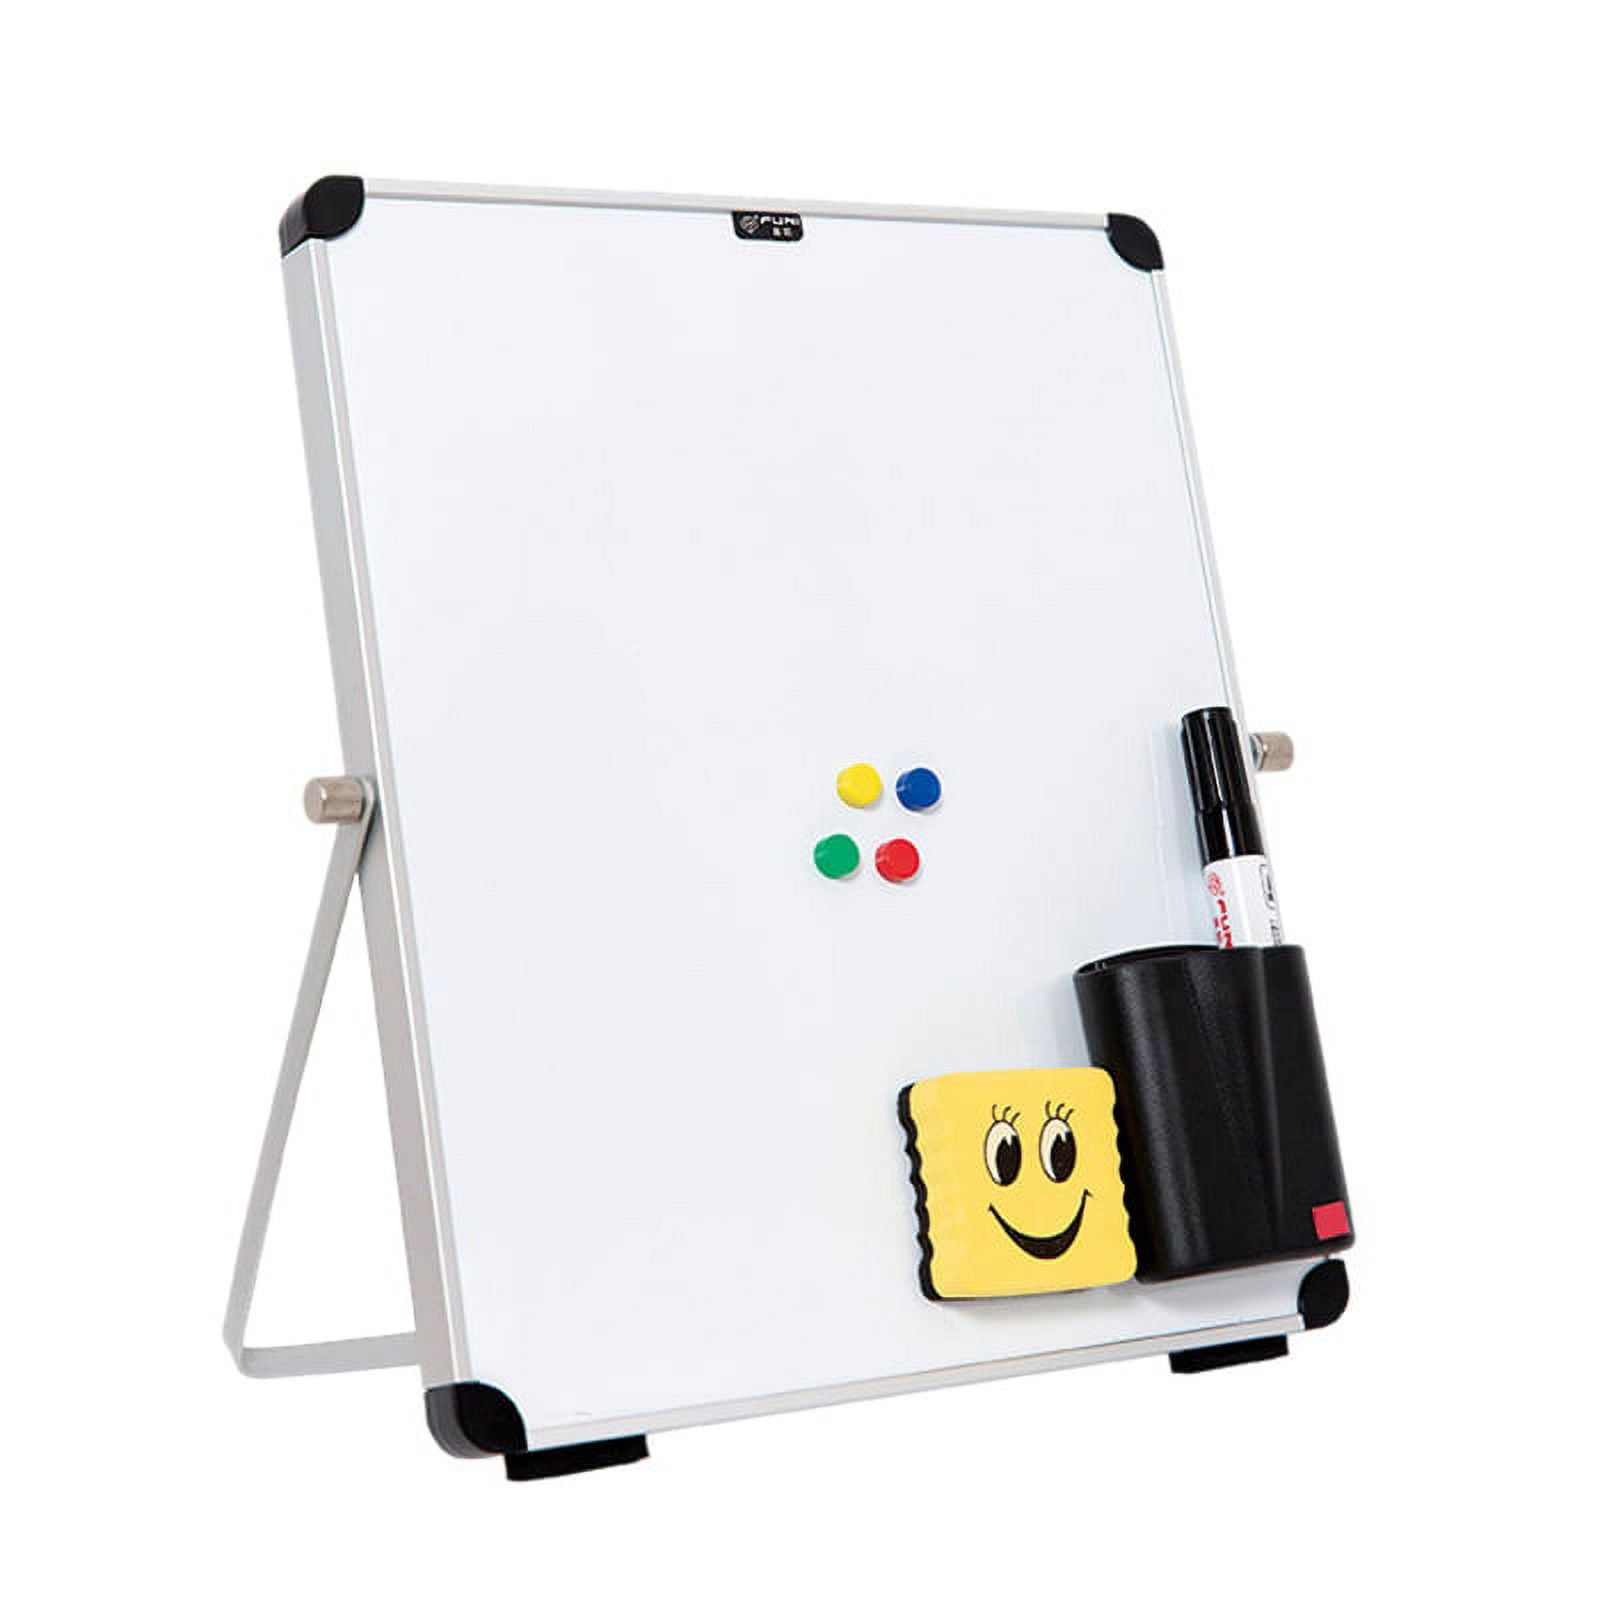 Magnetic Dry Erase Board Double Sided White Board Desktop Tabletop Planner Reminder with Stand for School Home Office